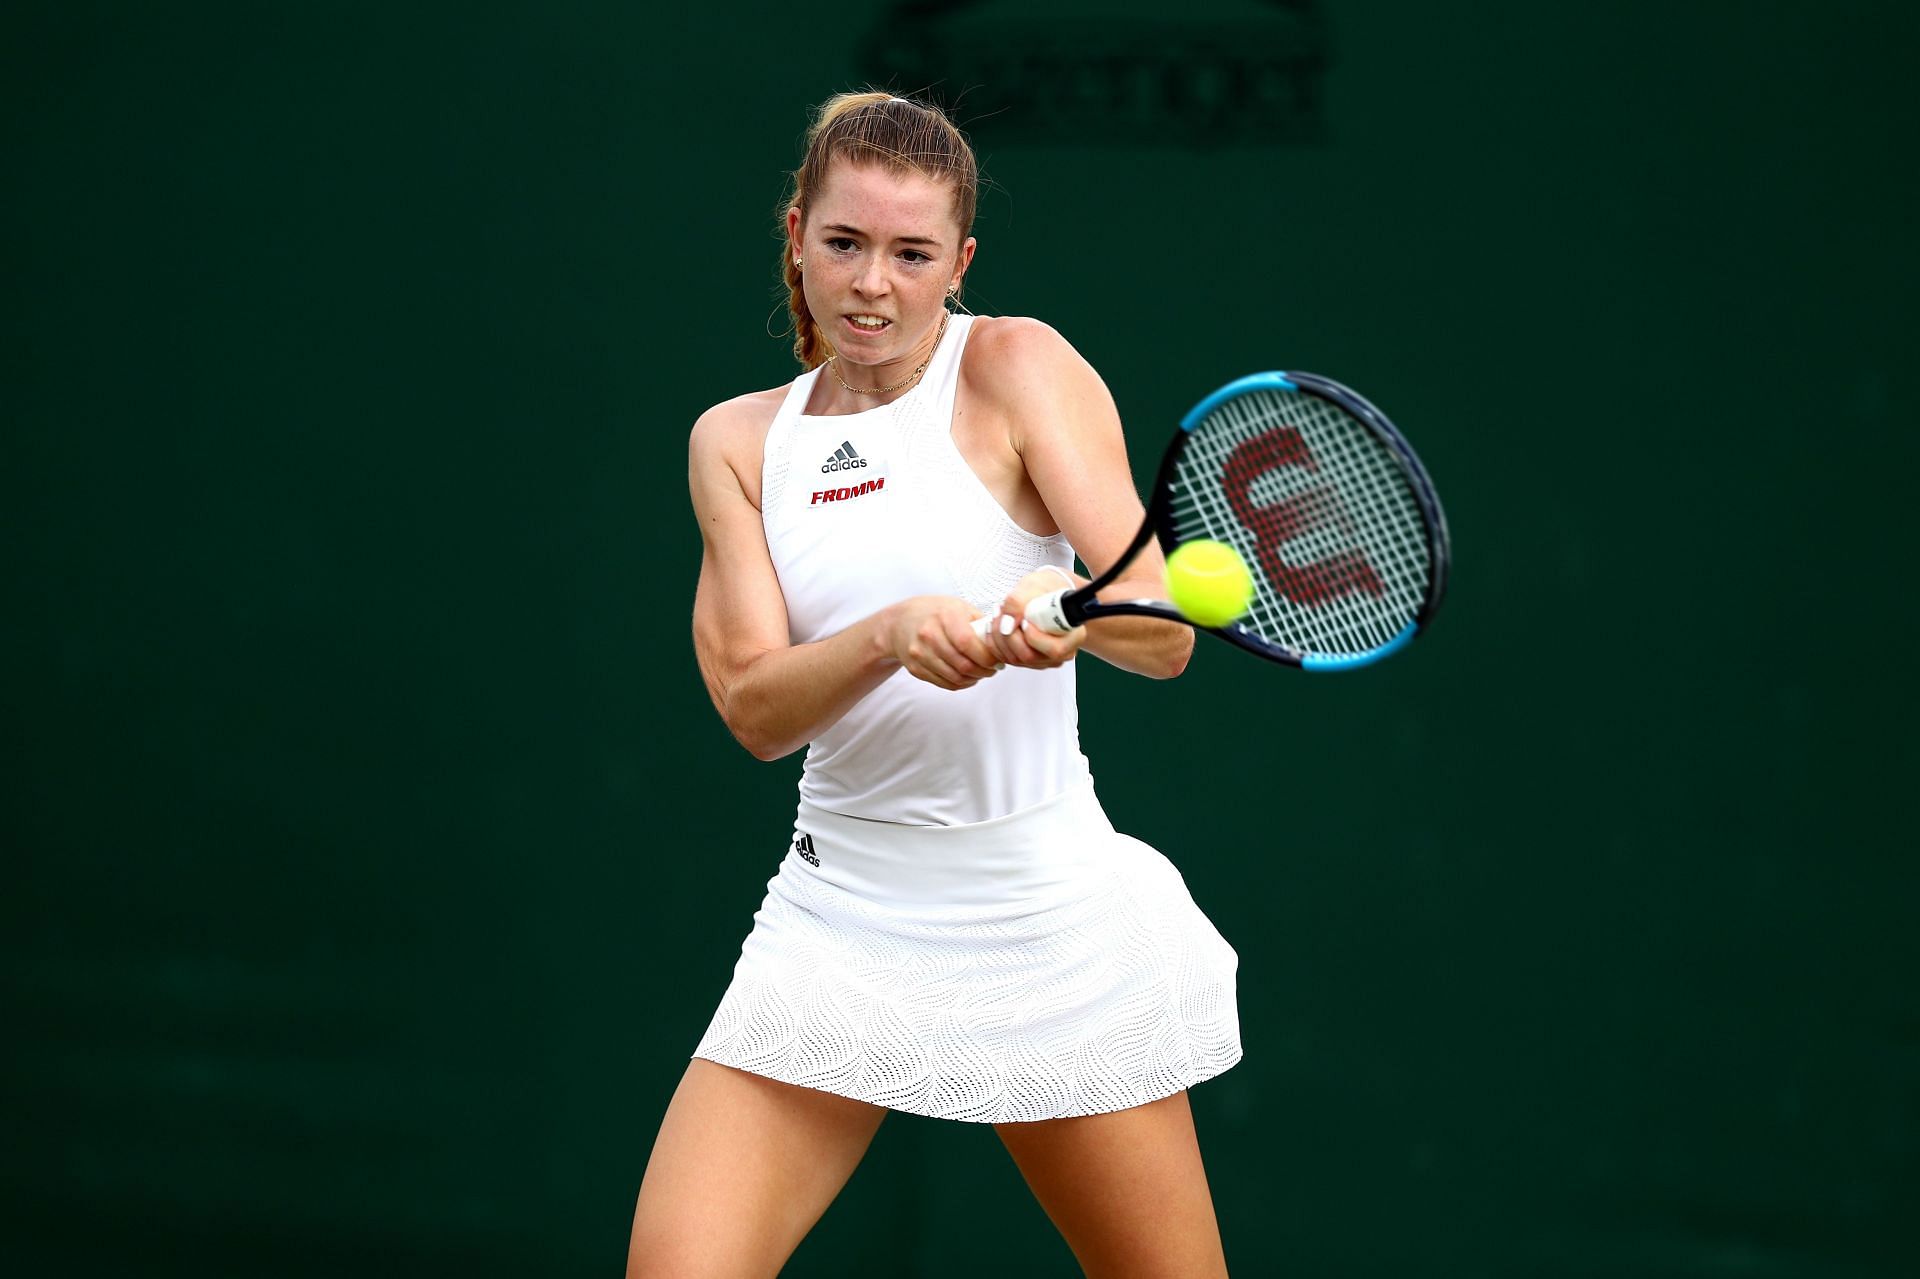 Simona Waltert in action at the 2018 Championships